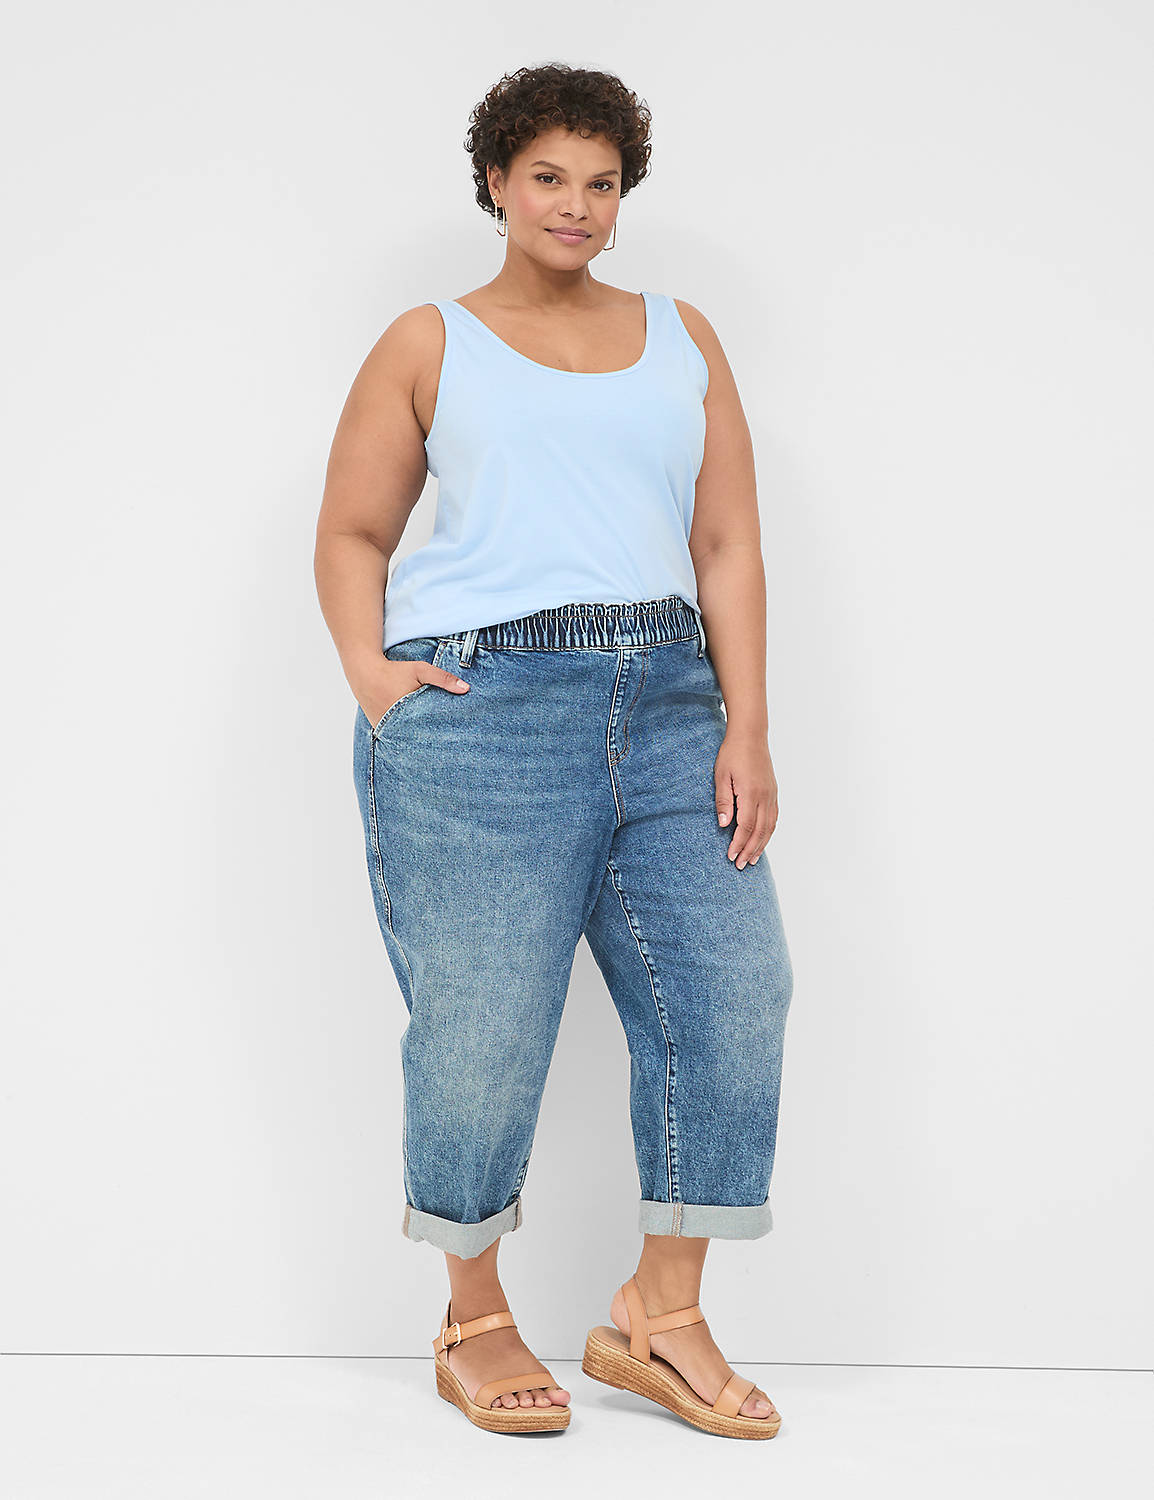 PULL ON MID RISE JEAN - ANITA WASH Product Image 1